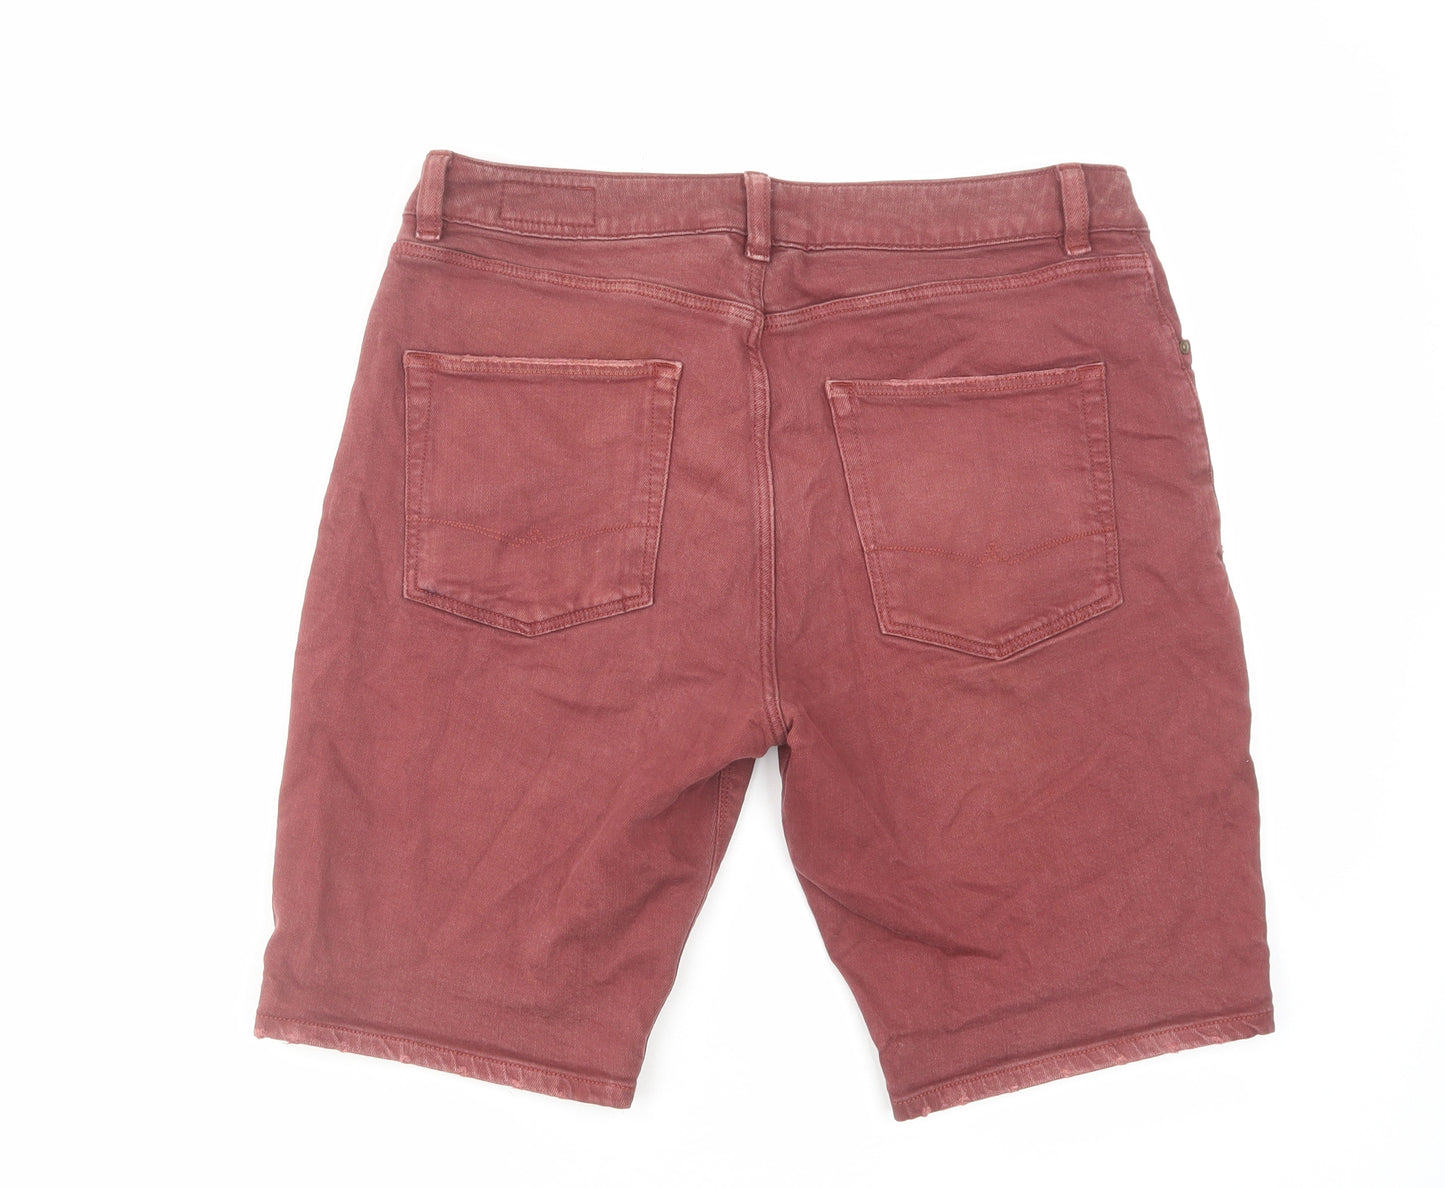 ASOS Mens Red Cotton Chino Shorts Size 32 in L10 in Regular Zip